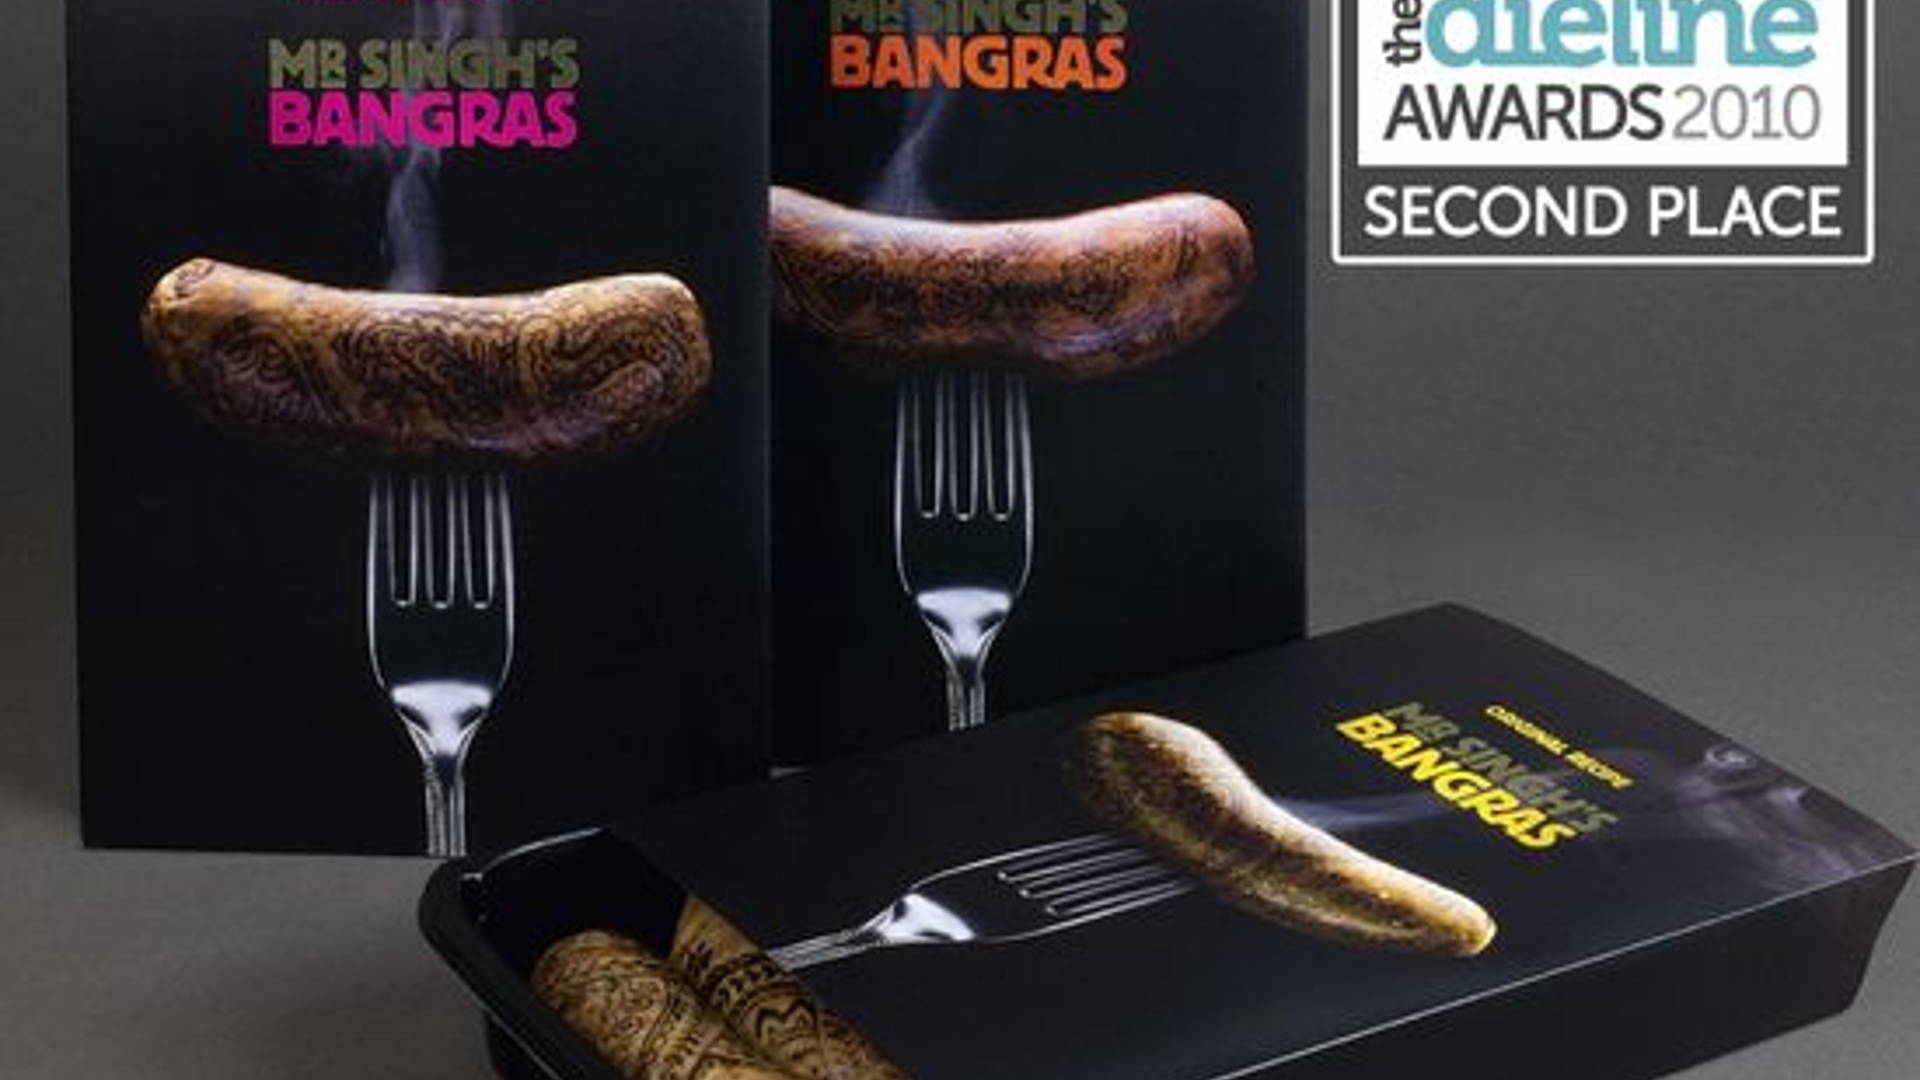 Featured image for The Dieline Awards: Second Place - Food A - Mr Singhs Bangras